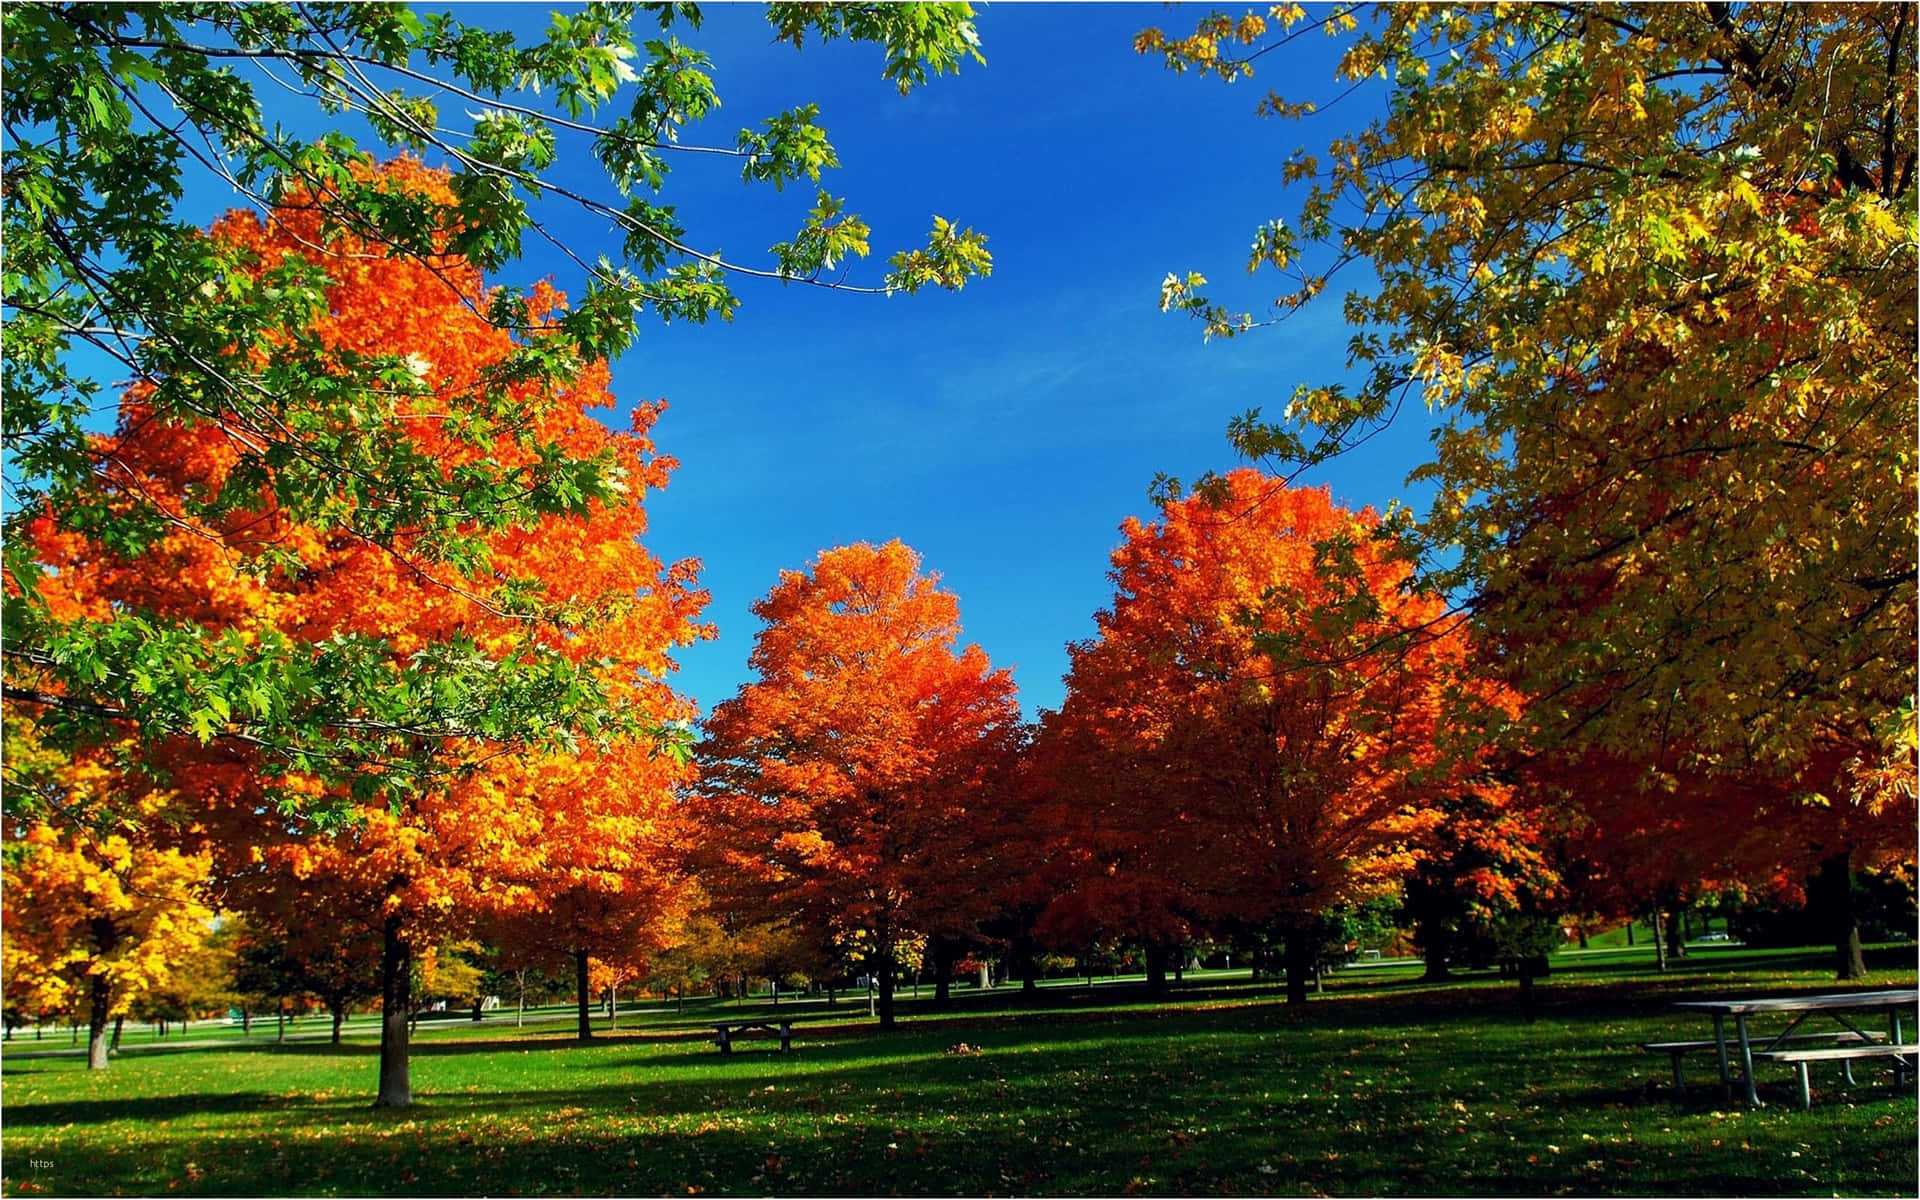 "Welcome to Fall - Nature's Colorful Masterpiece" Wallpaper